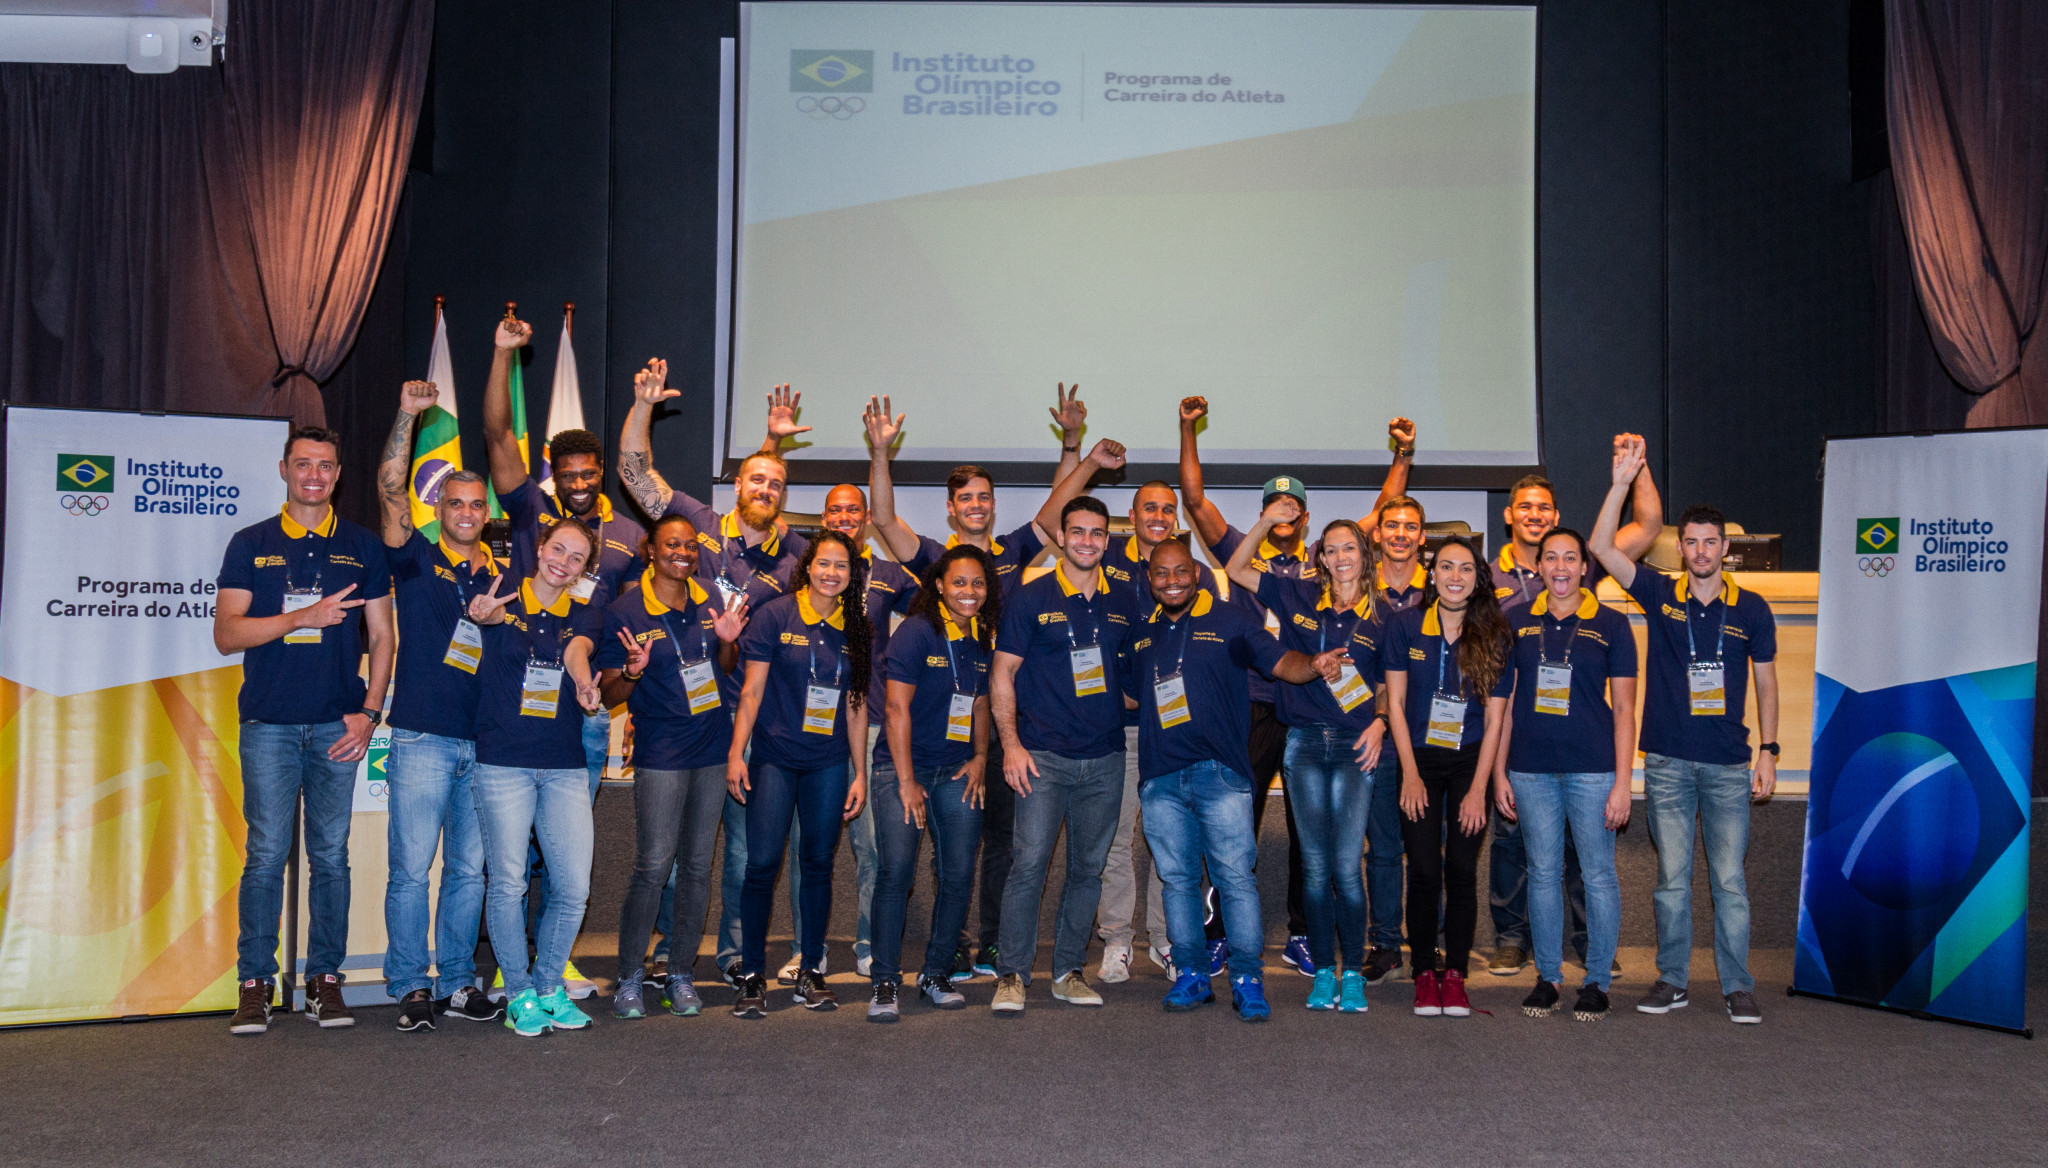 The Brazilian Olympic Committee has launched the sixth edition of its seven-month long Athlete Career Programme ©COB